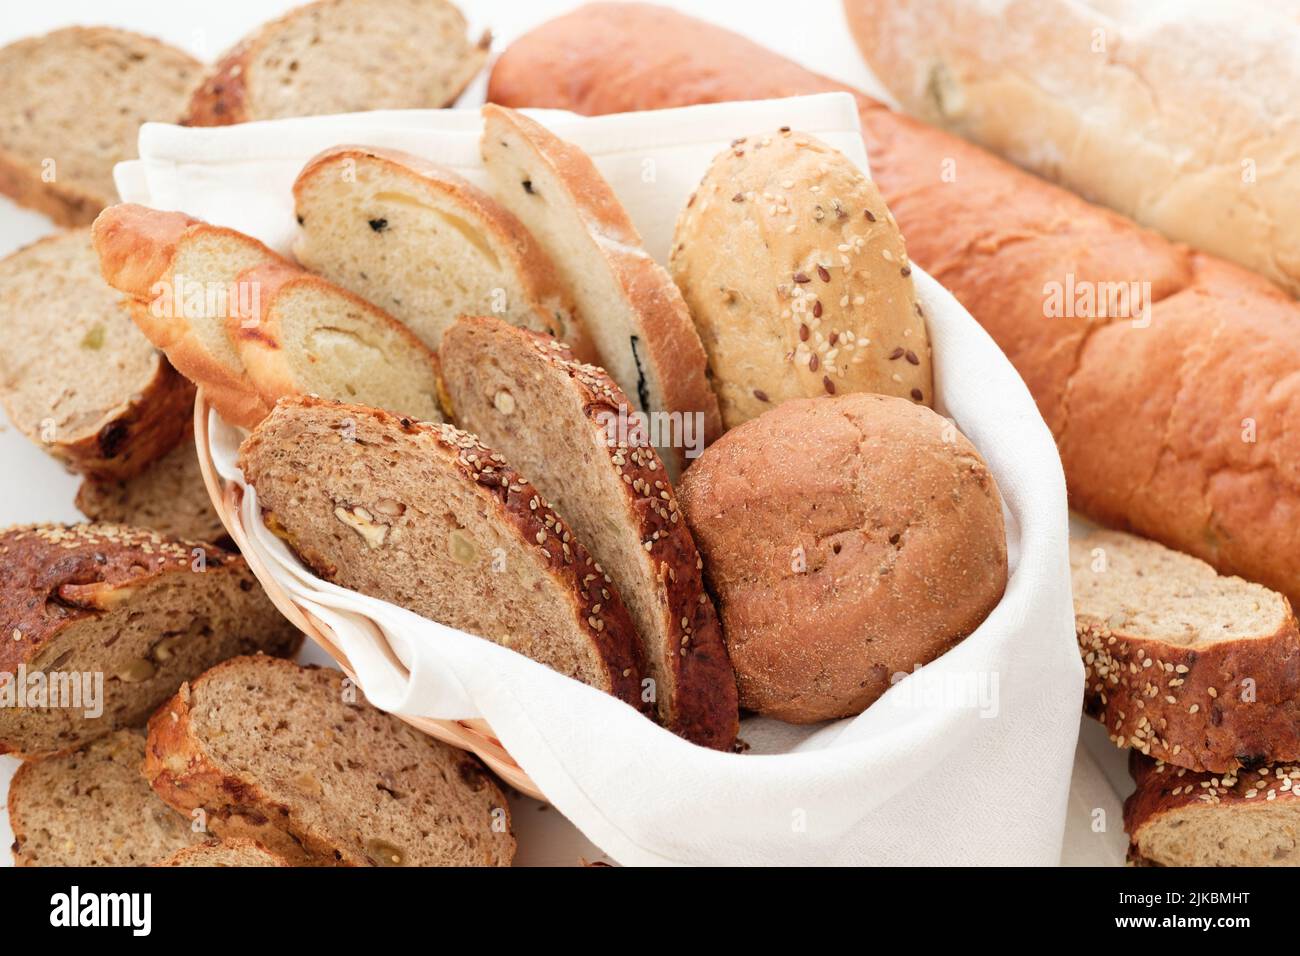 wholesome bakery close up fresh bread background Stock Photo